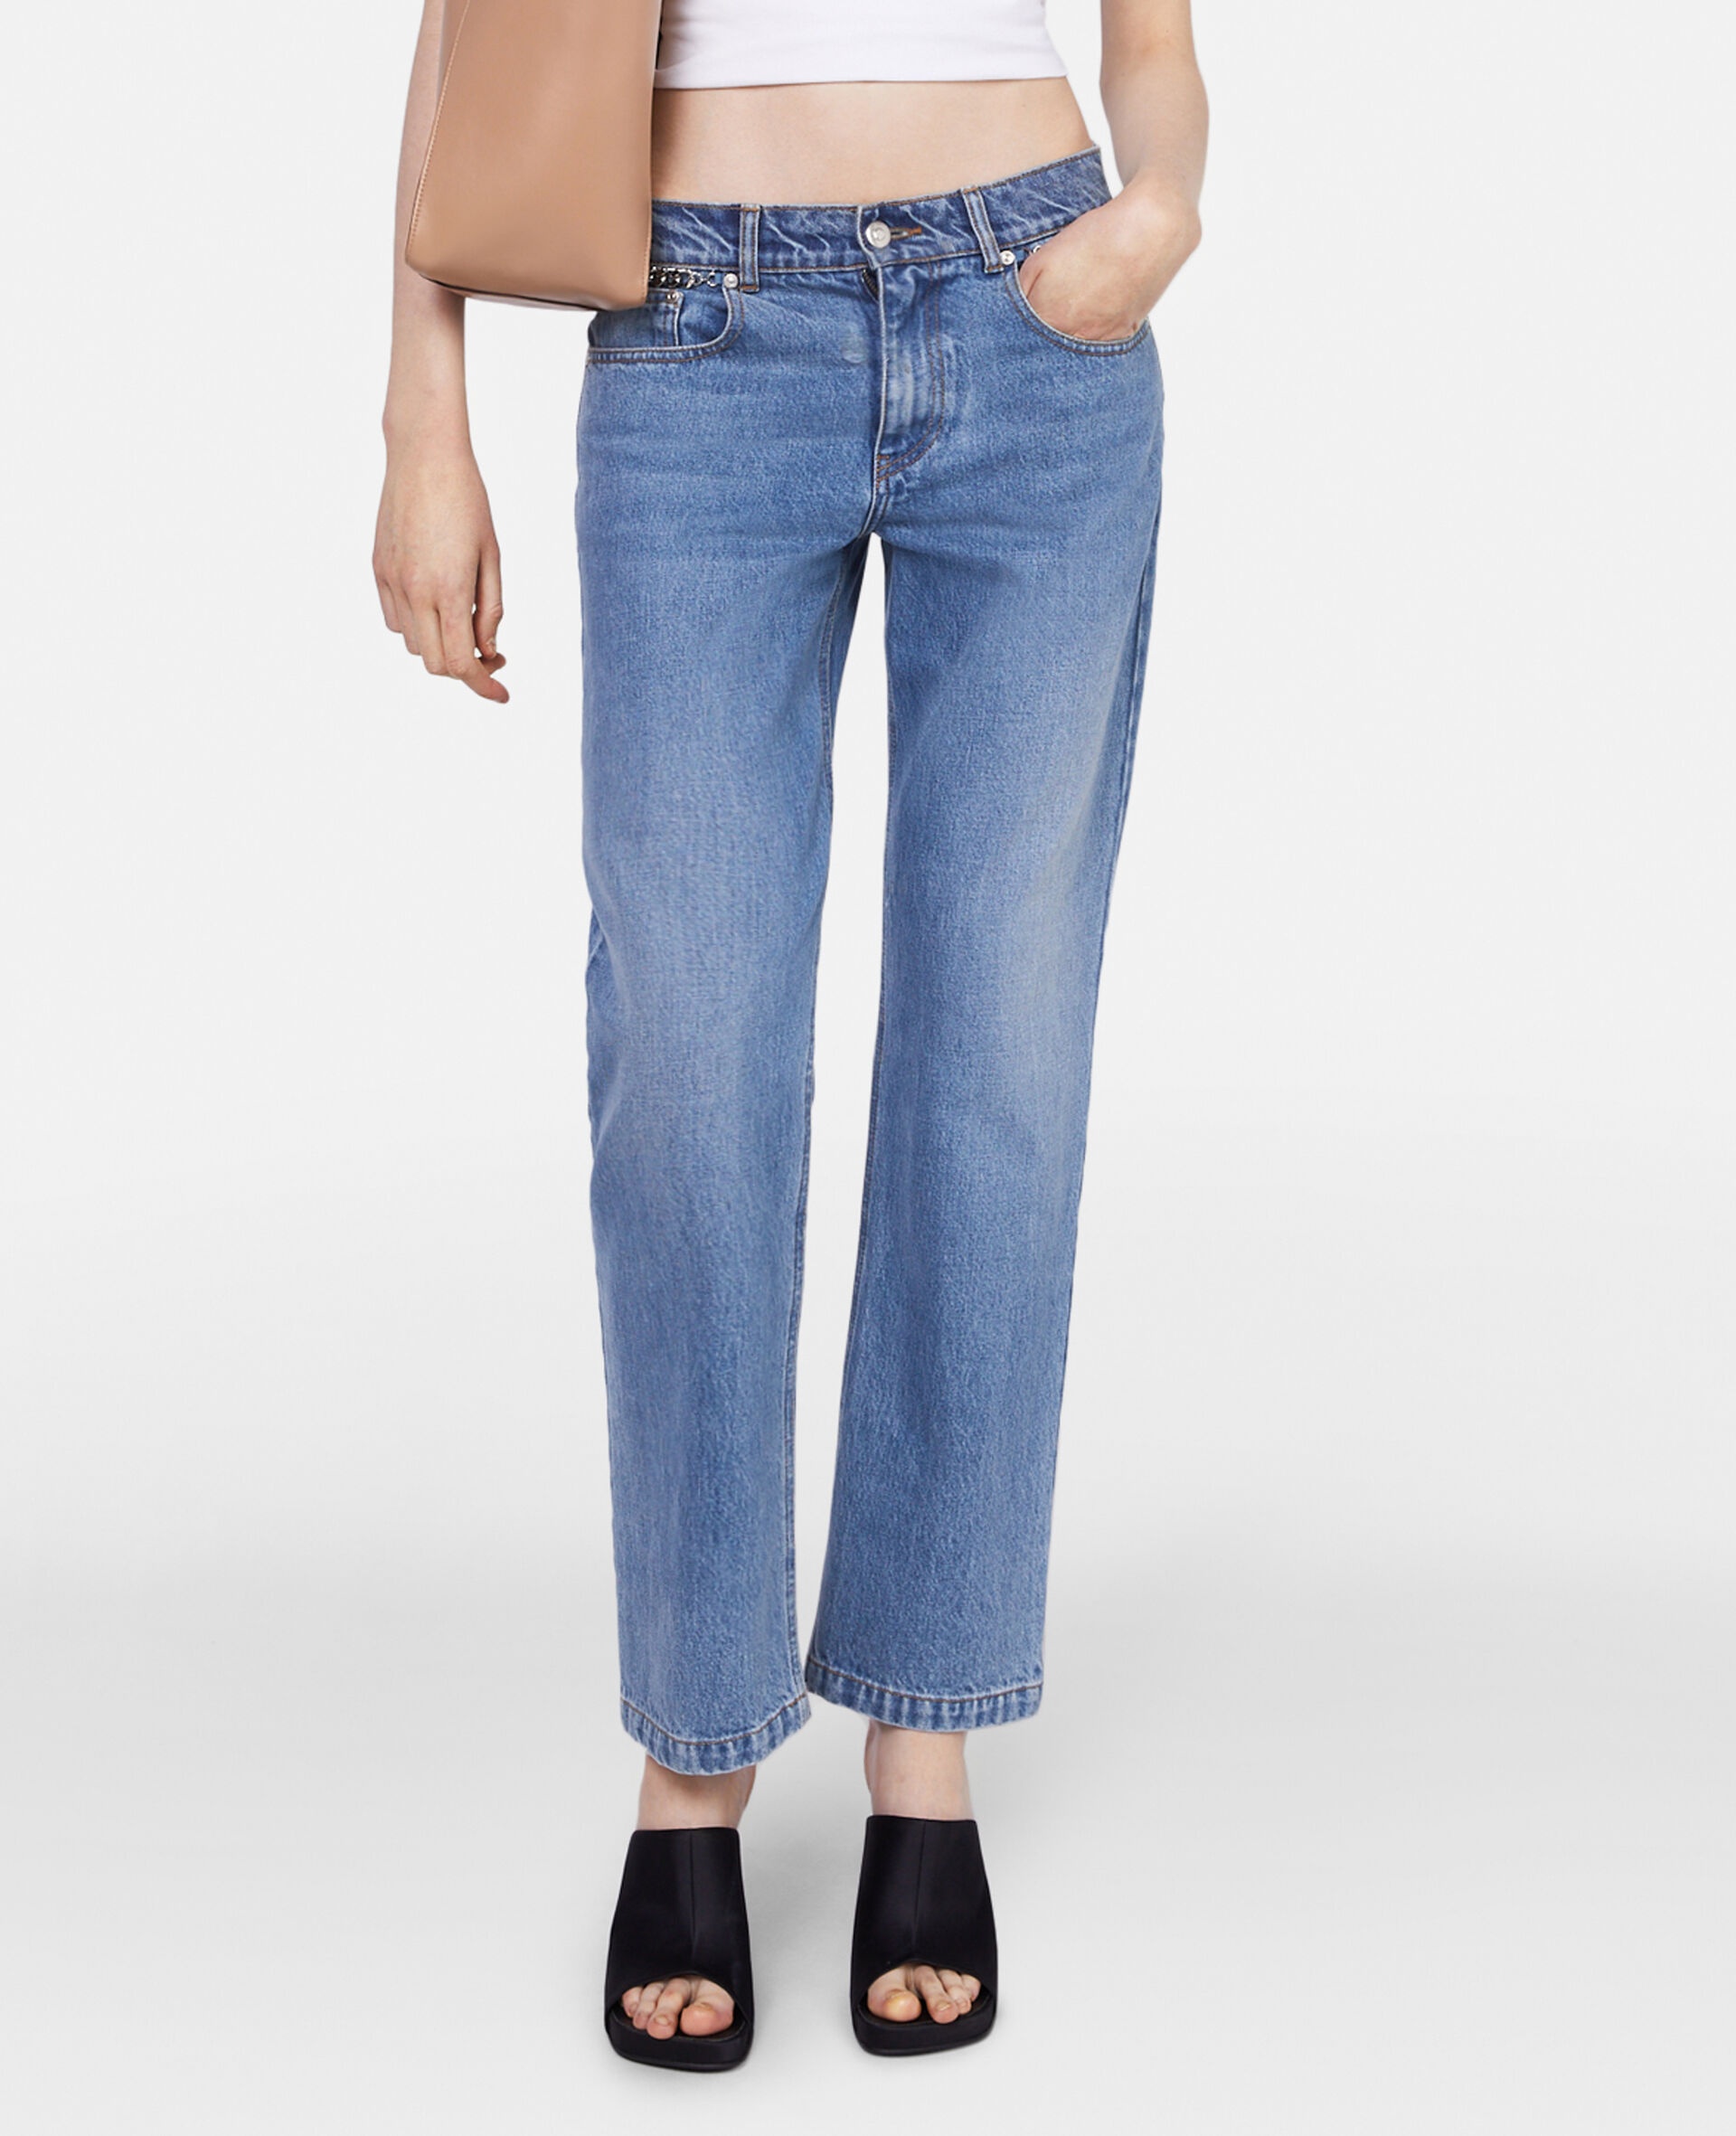 Falabella Chain Light Wash Cropped Jeans - 4